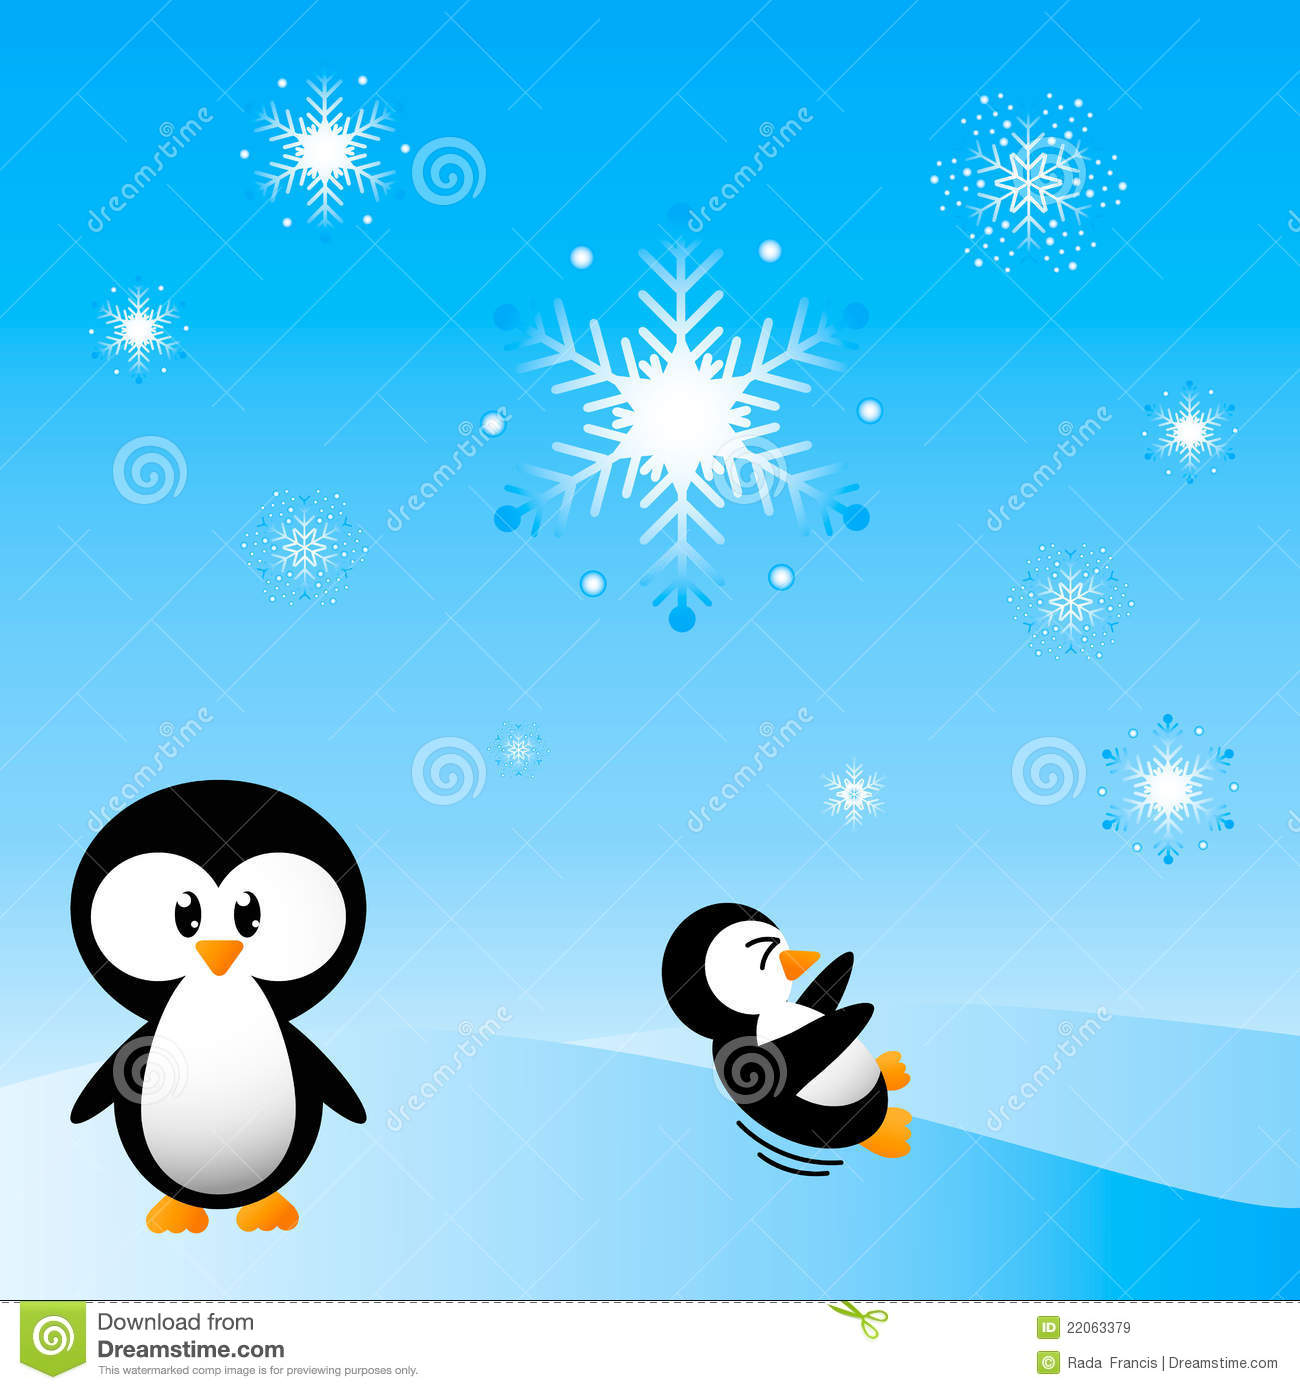 Penguins Playing In Snow Royalty Free Stock Images   Image  22063379